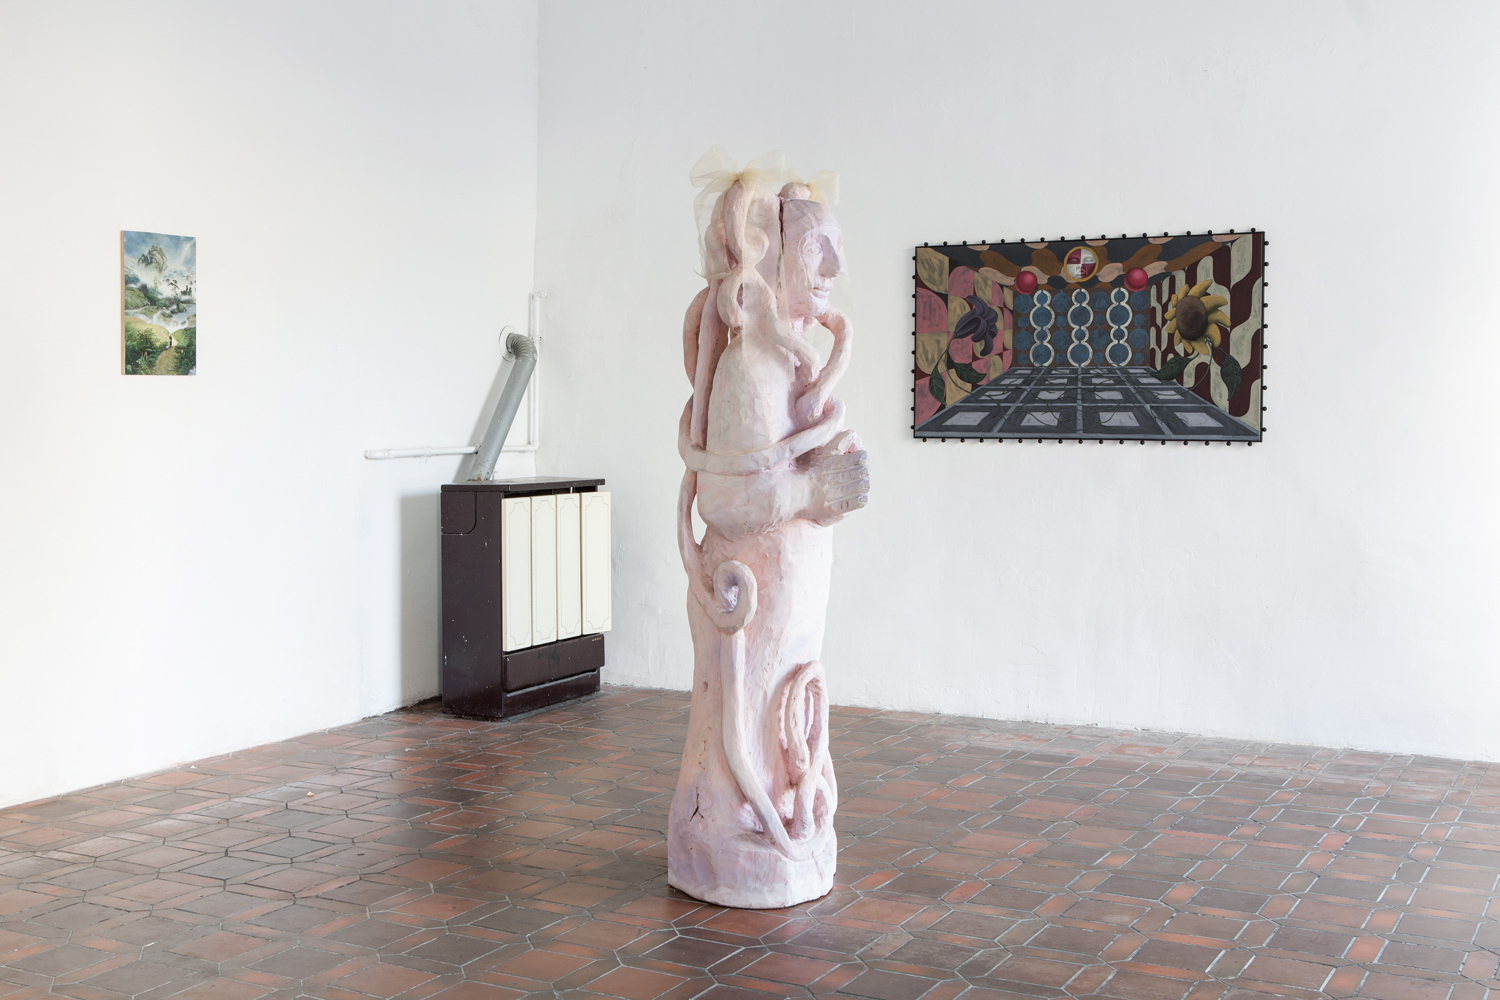 »Fioretti« curated by Yves-Michele Sass, 2020, installation view, GOMO, Vienna